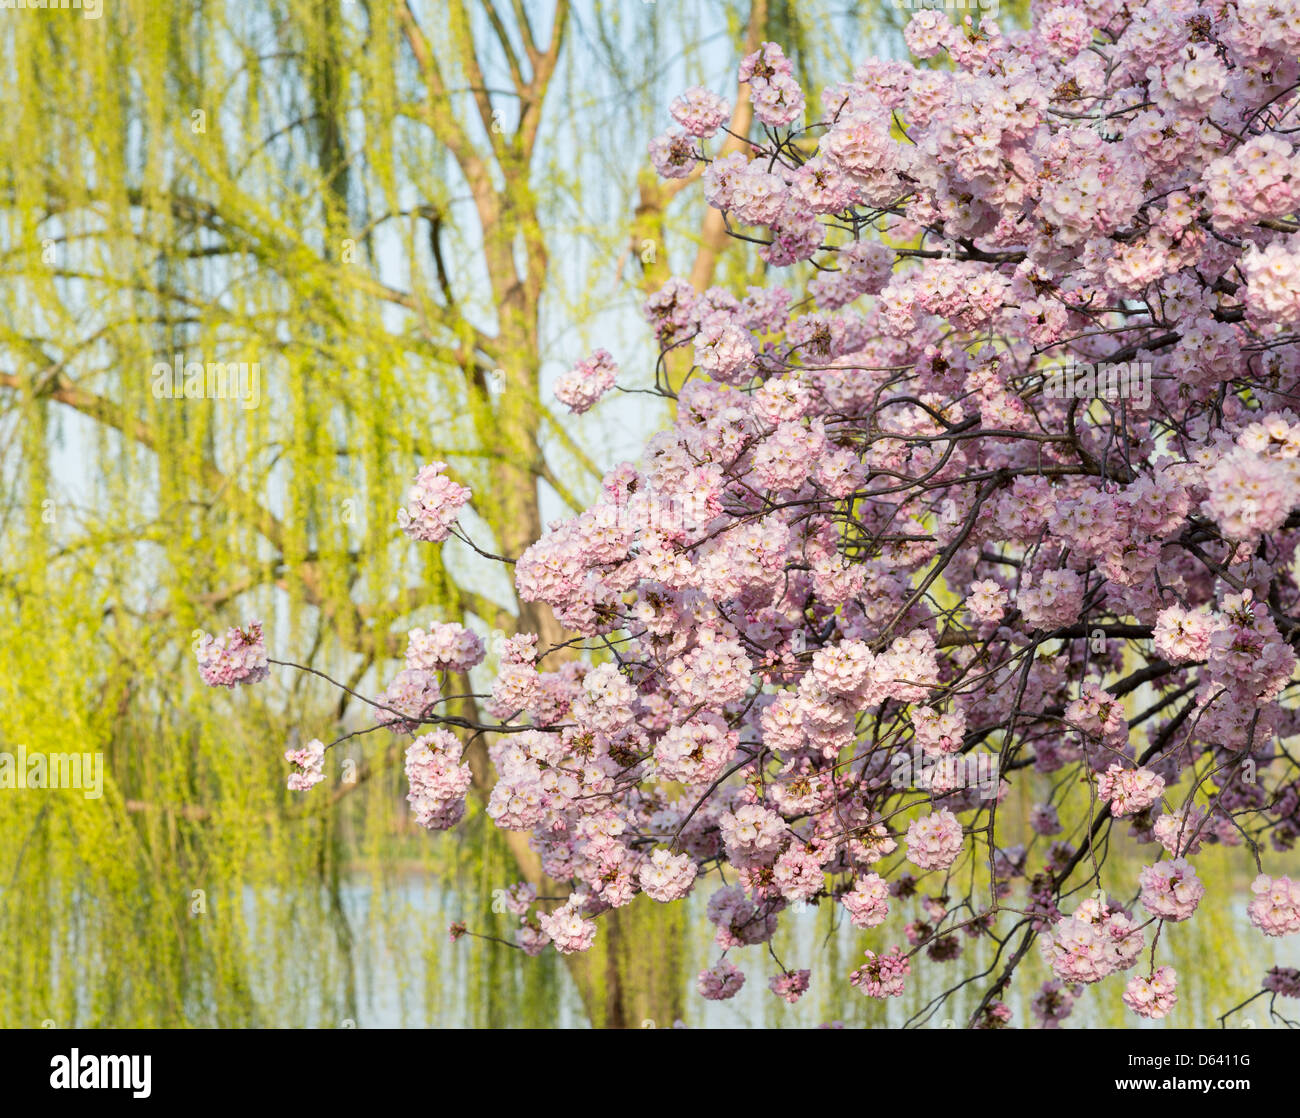 Flowering Japanese cherry blossom tree in front of weeping willow by side of Potomac river in Washington DC Stock Photo